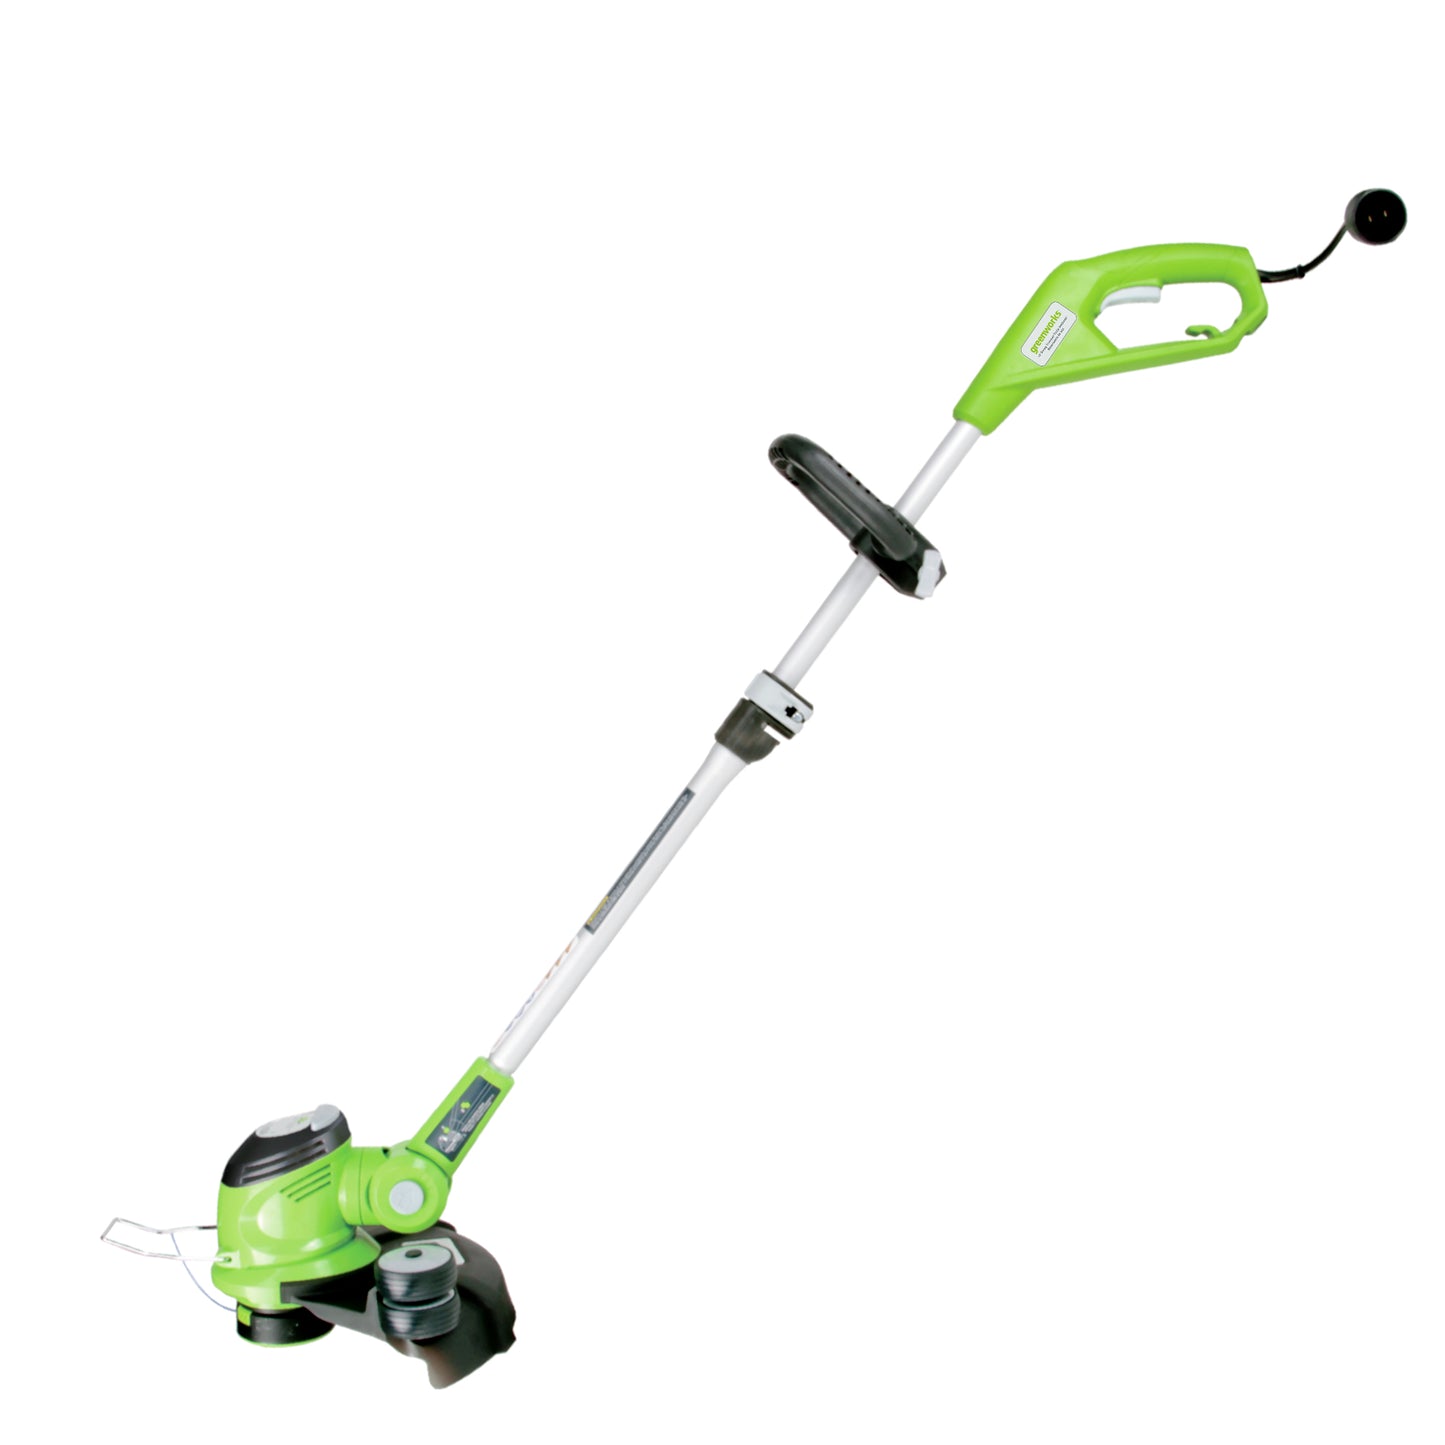 Greenworks 21272 Corded Electric 5.5 Amp 15 inch String Trimmer